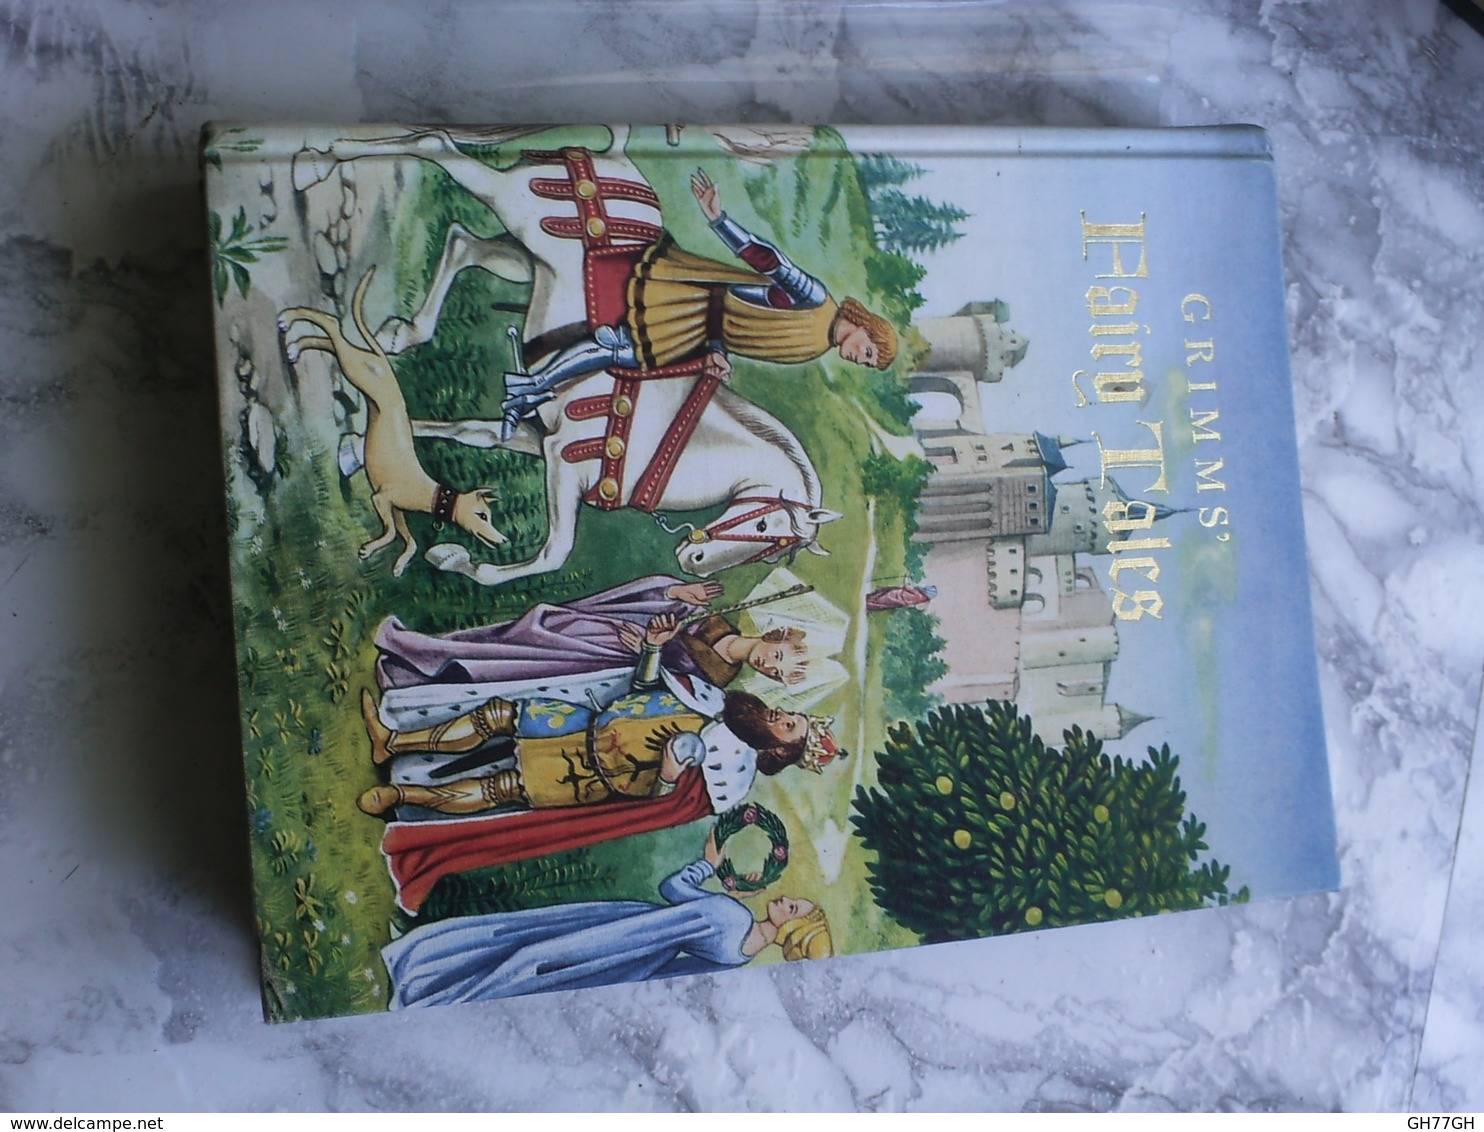 Grimm's Fairy Tales By The Brothers Grimm -Grosset & Dunlap Publishers NY 1974. CONTES DE GRIMM - Fairy Tales & Fantasy